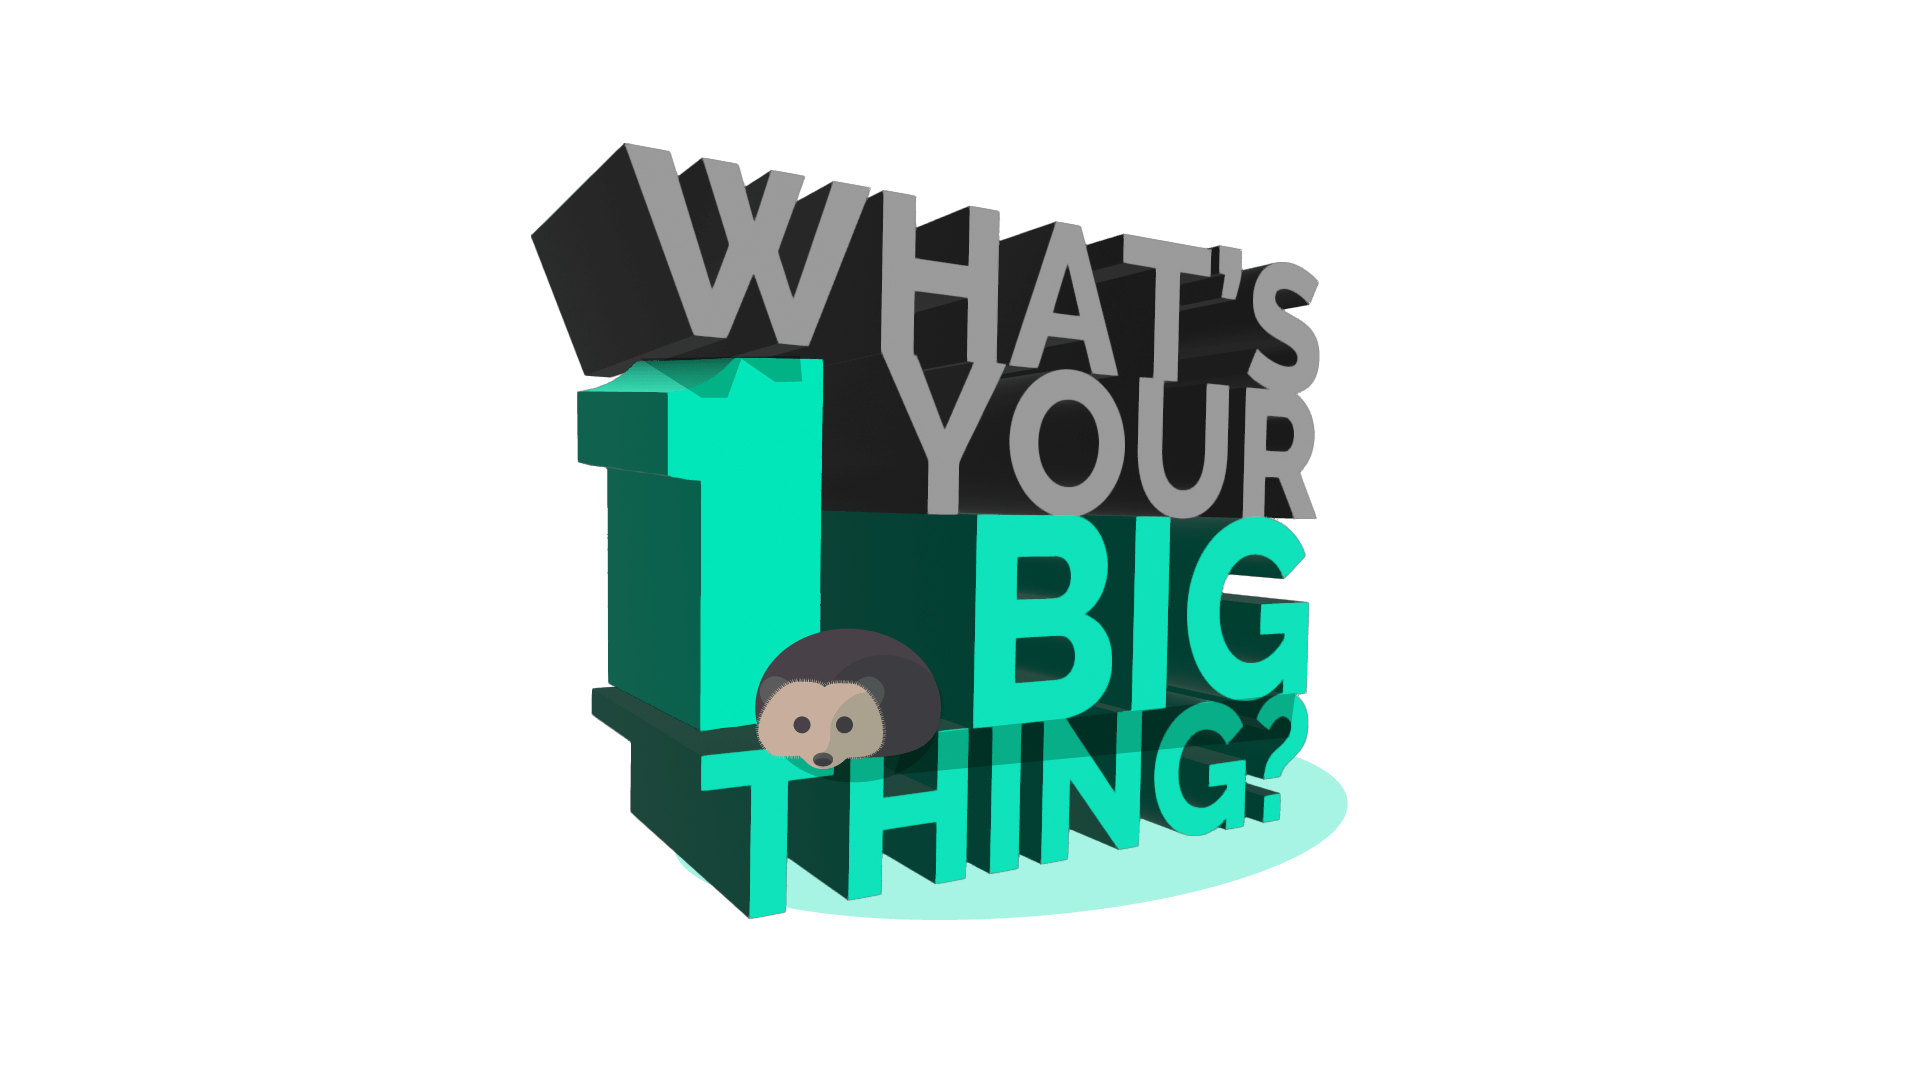 What's your 1 big thing?